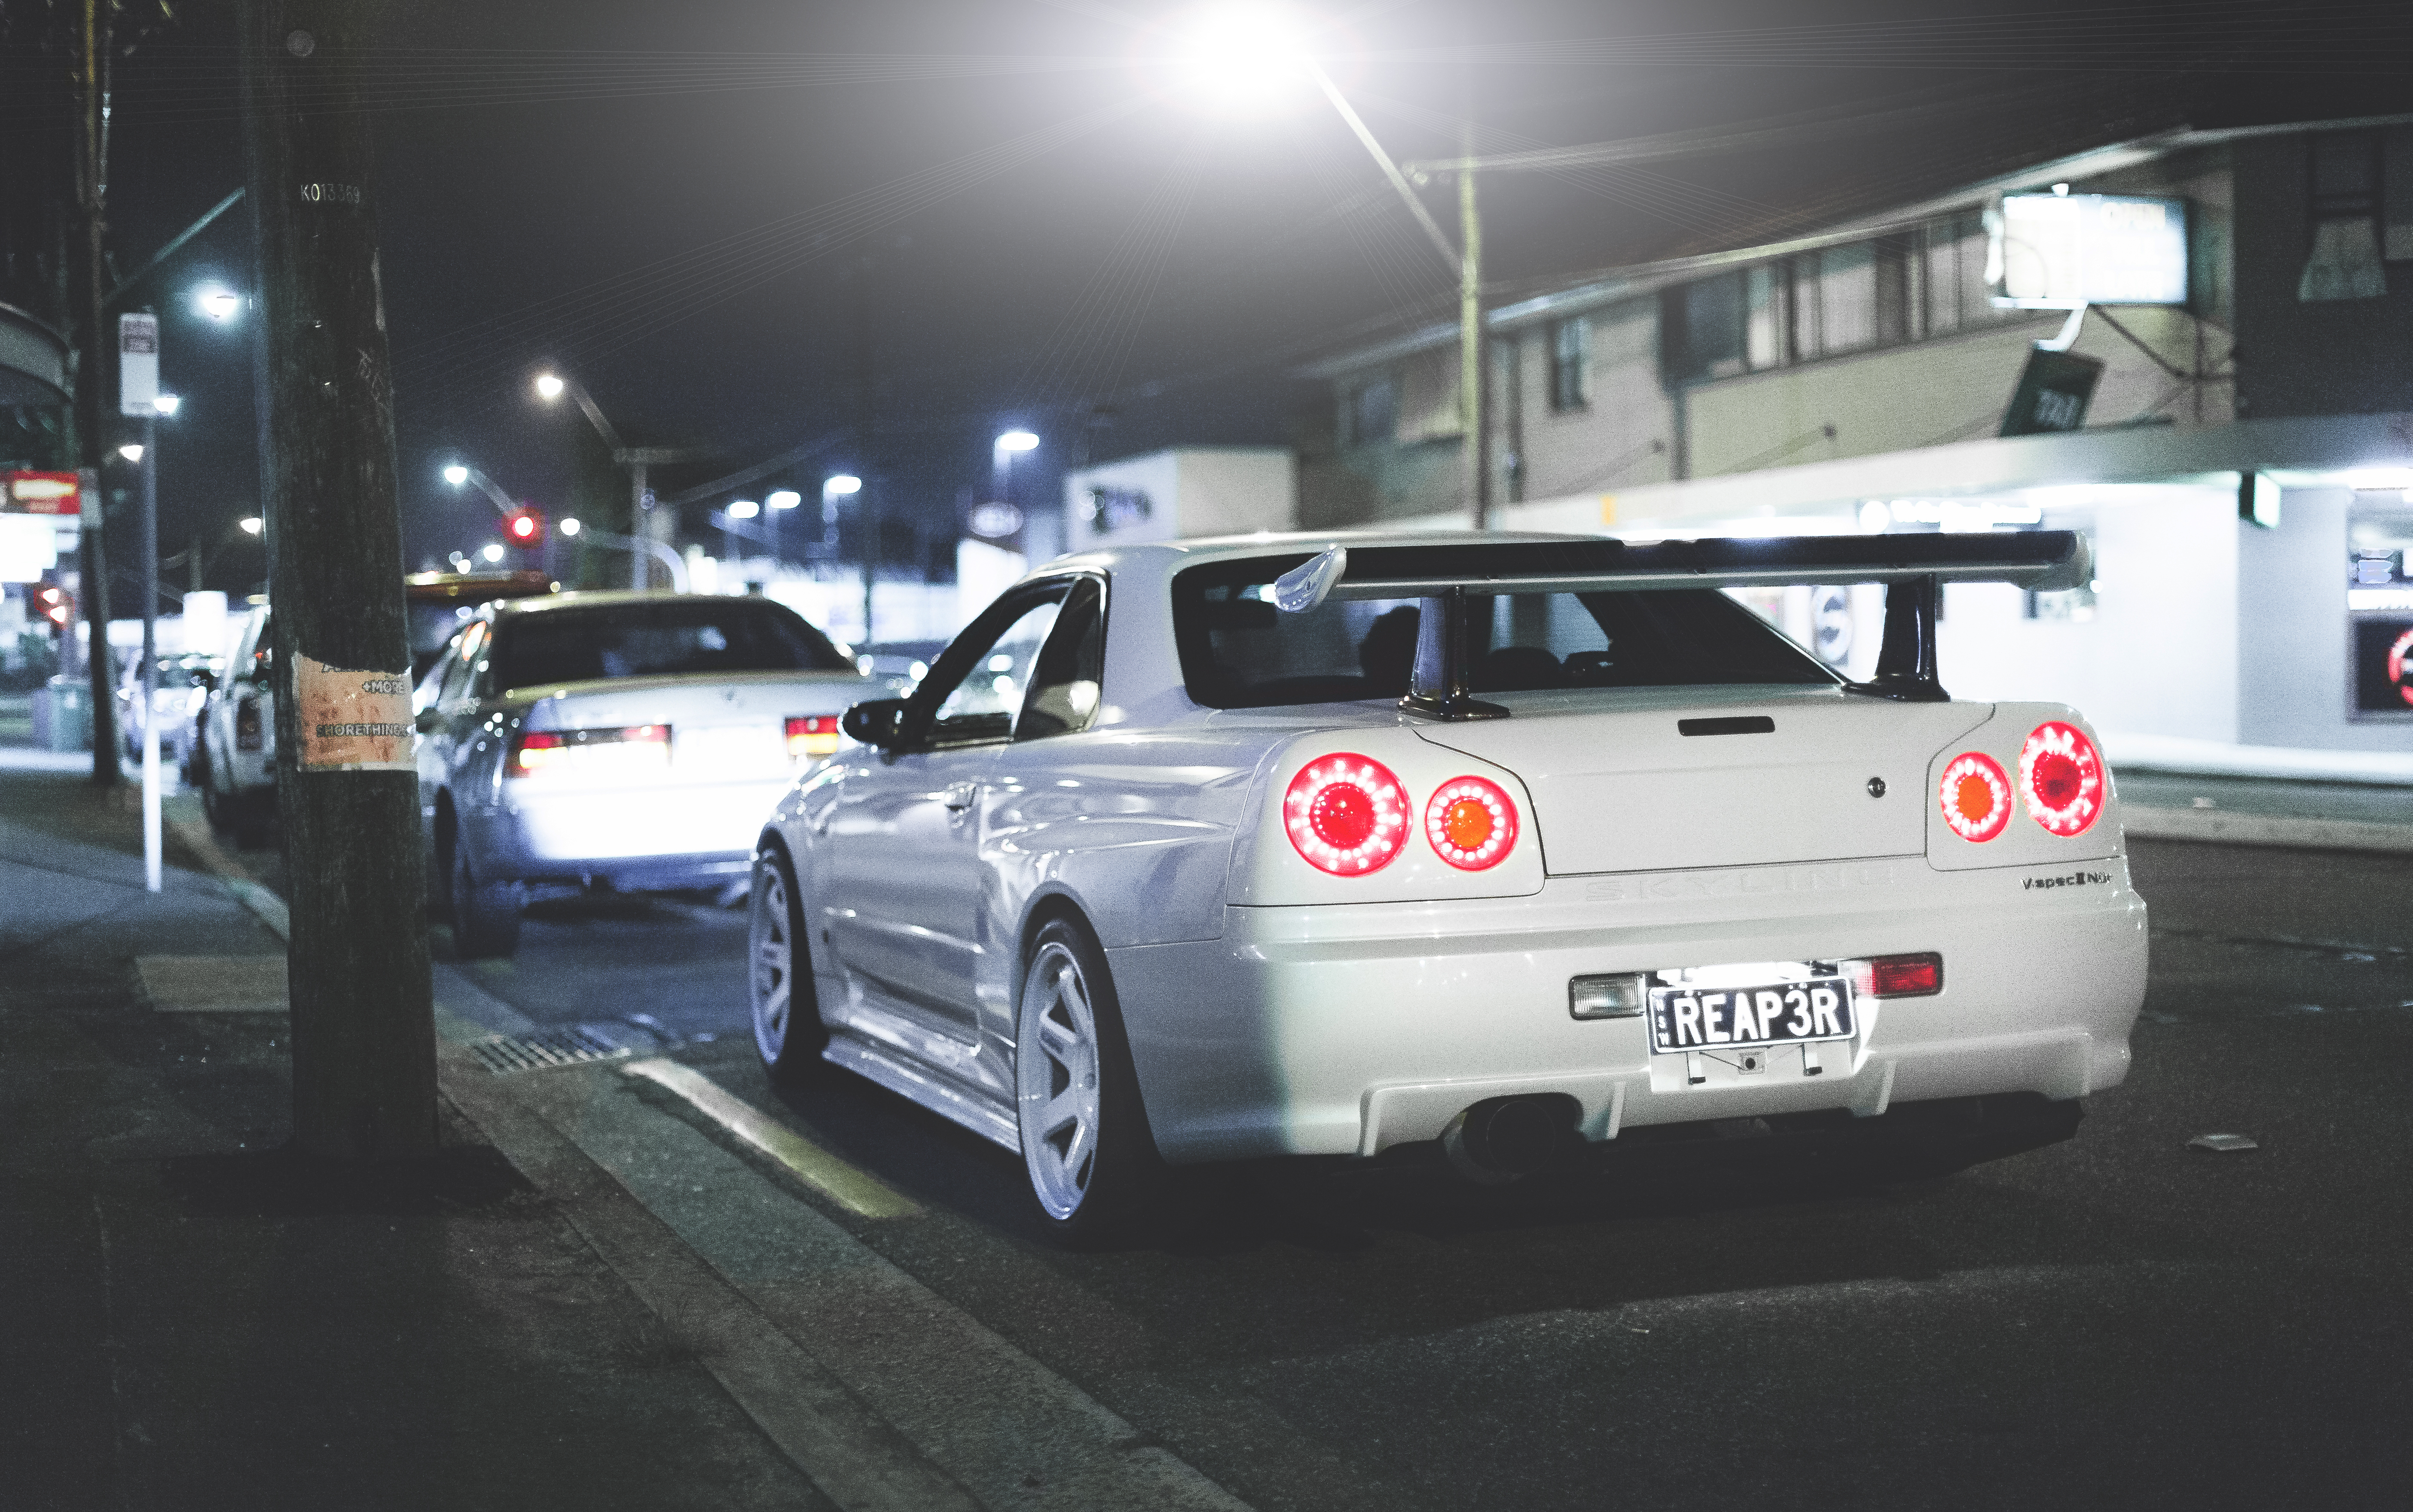 nissan, cars, back view, rear view, gt-r, skyline, r34